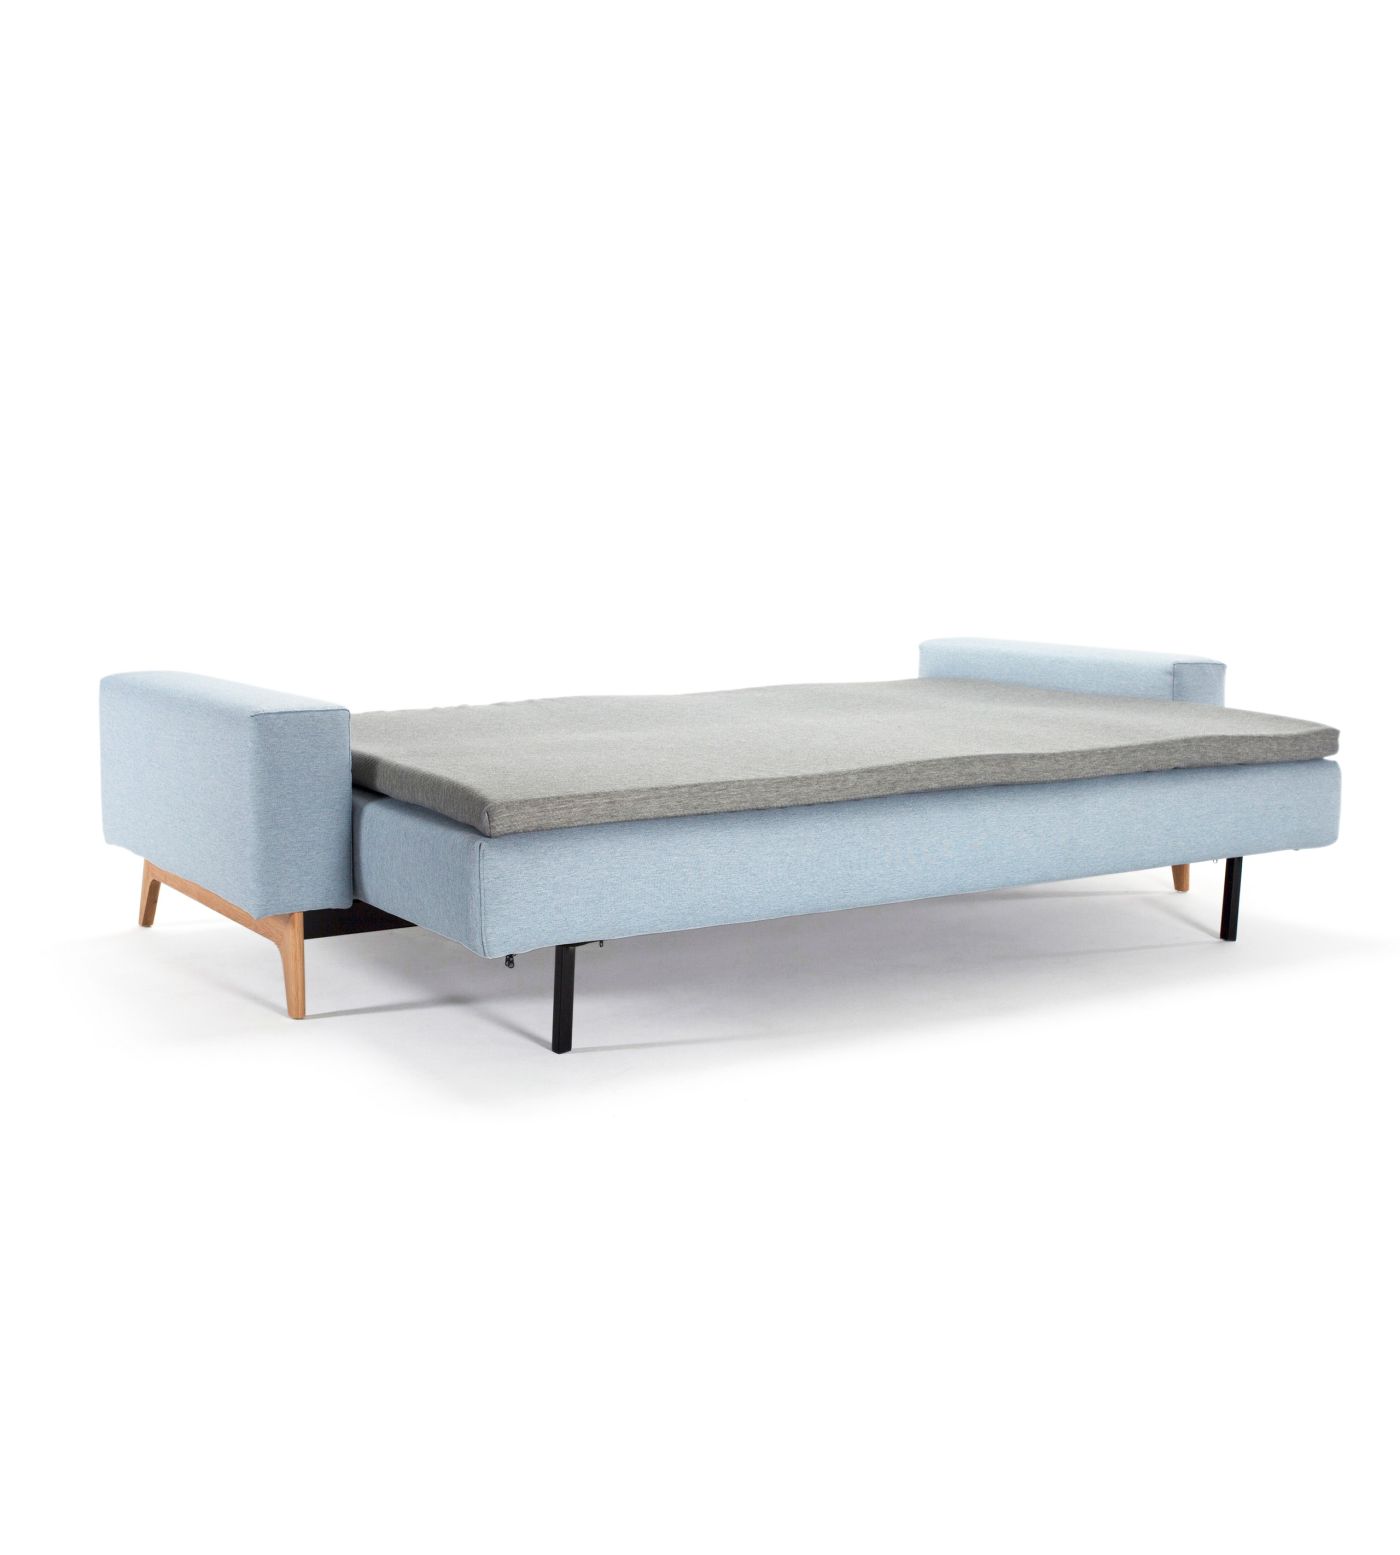 Inno Pillow Topper by Innovation Living, Modern Sofa Beds